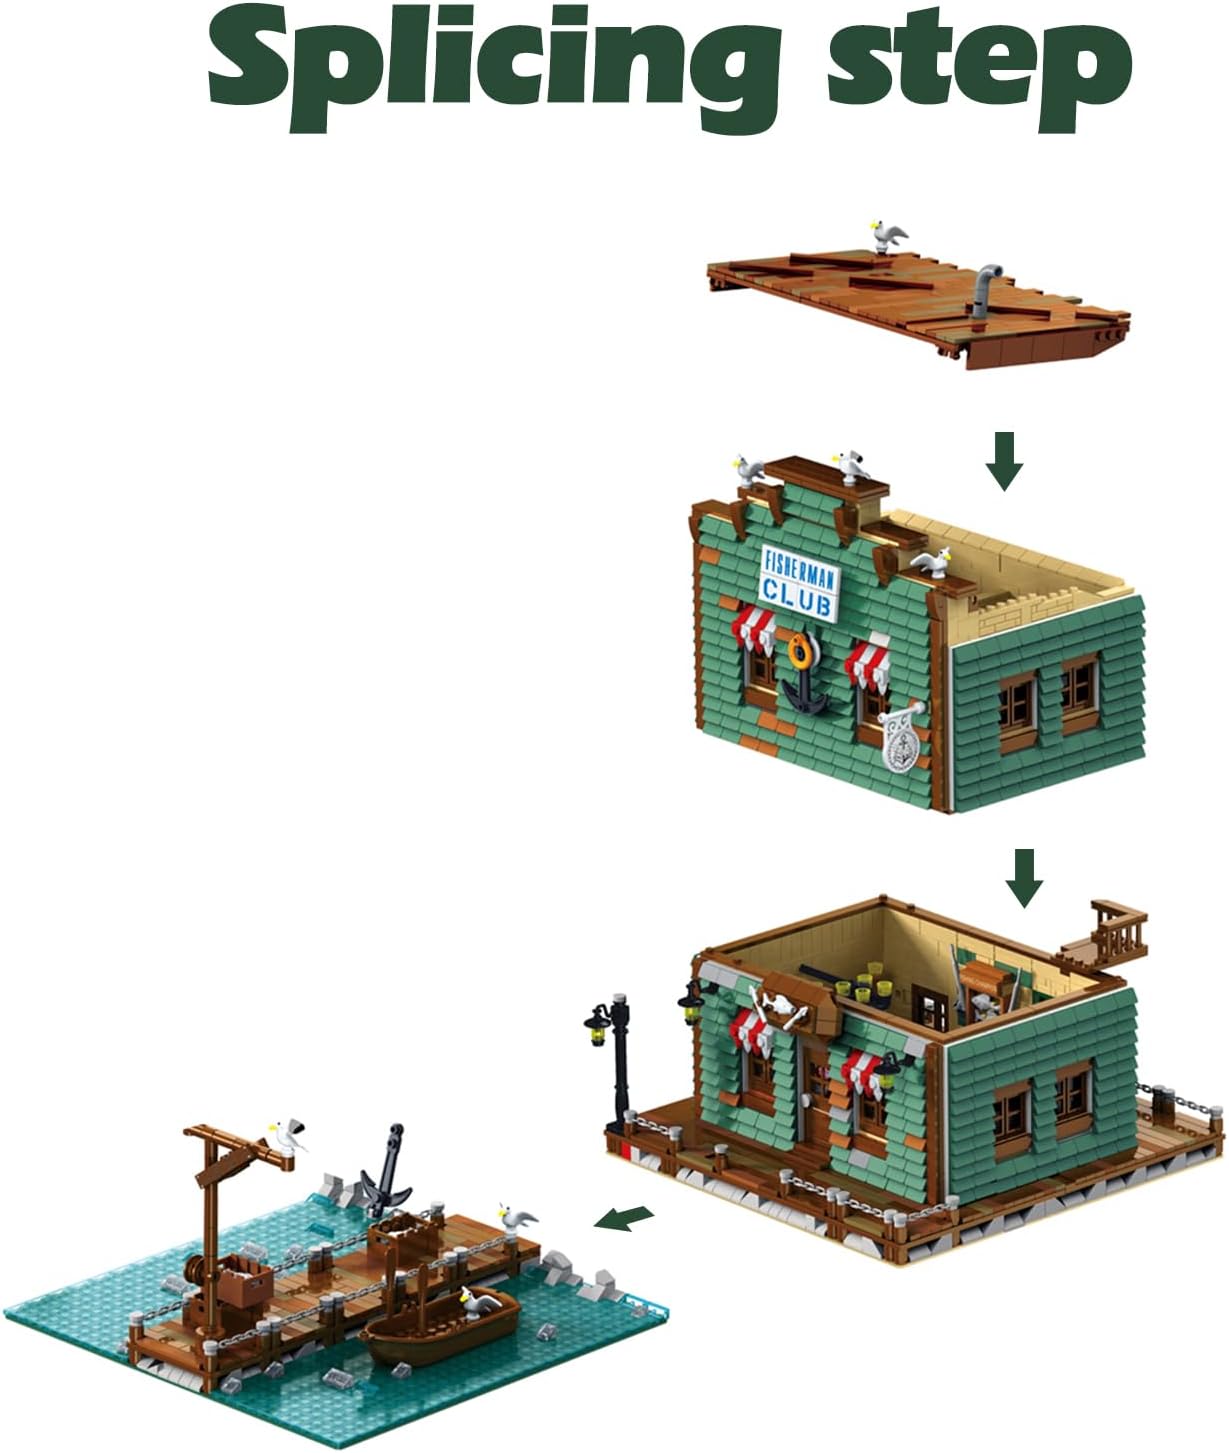 Medieval Wood-Cabin Building Toys, Fisherman Club Construction Toys Seaview House Model Architecture Building Blocks for Adults and 6+ Teens Home Decor (3265 Pcs)